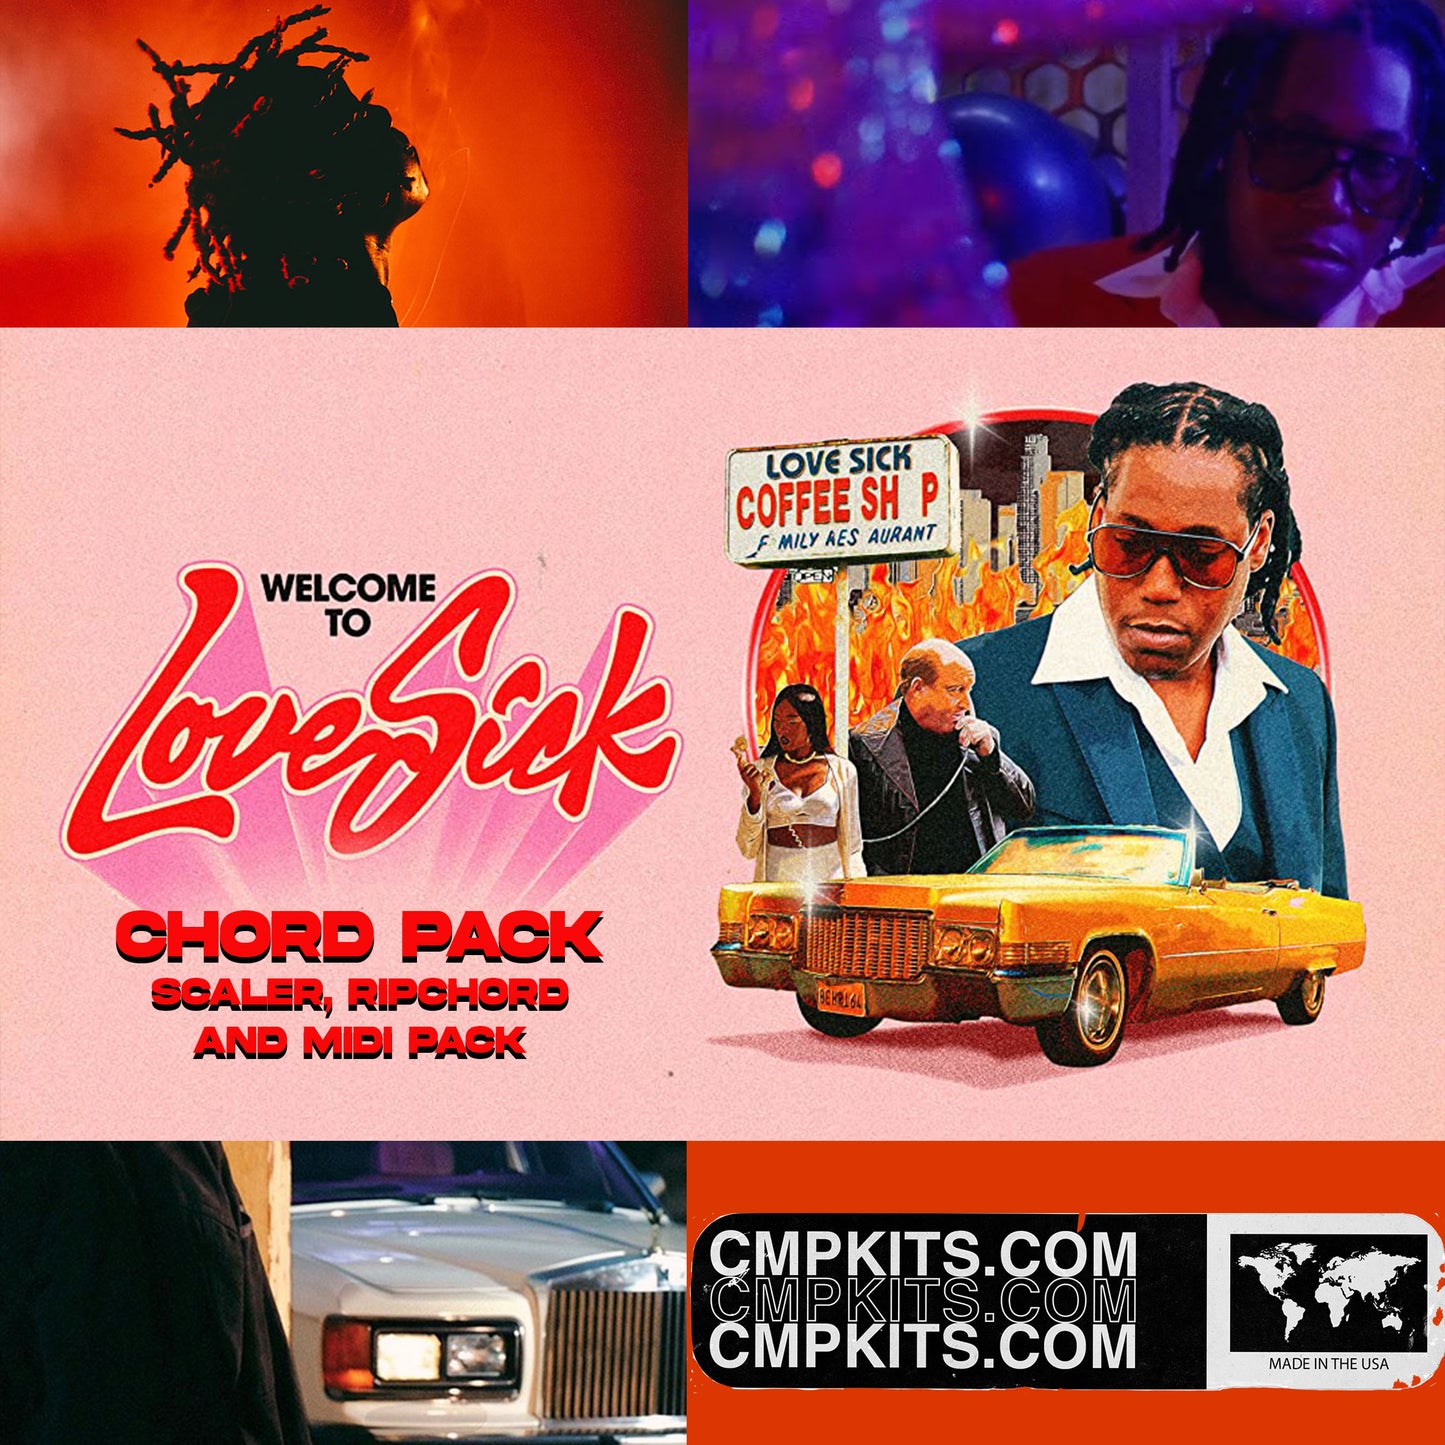 Don Toliver Lovesick Chord Pack - Scaler, Ripchord and MIDI Pack